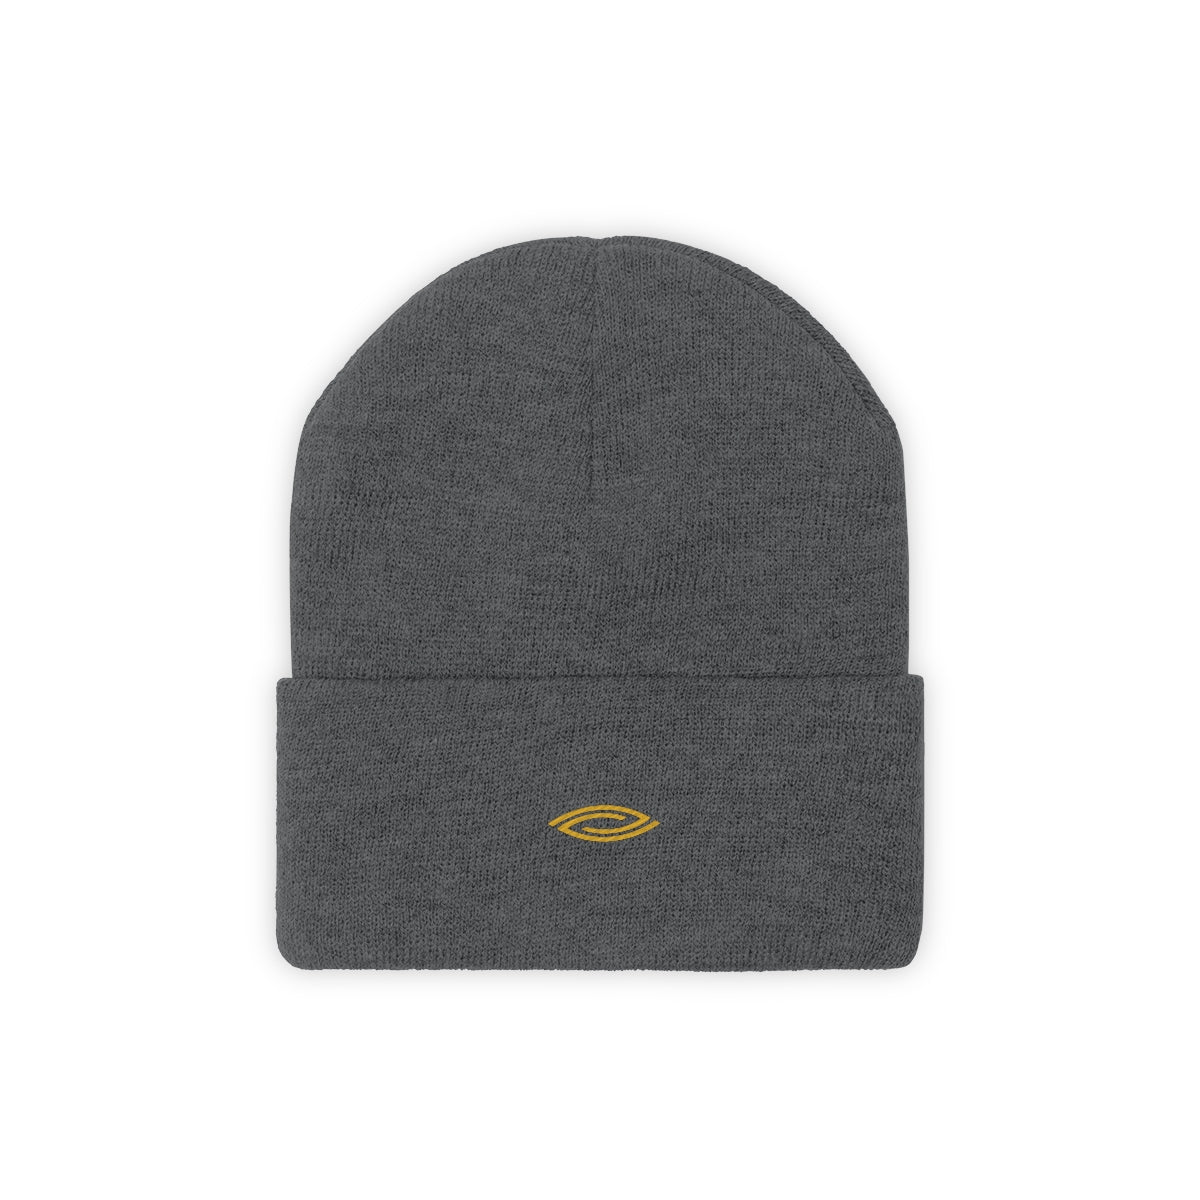 Tuque | Upcycable-Impactful-Customizable l Impactive